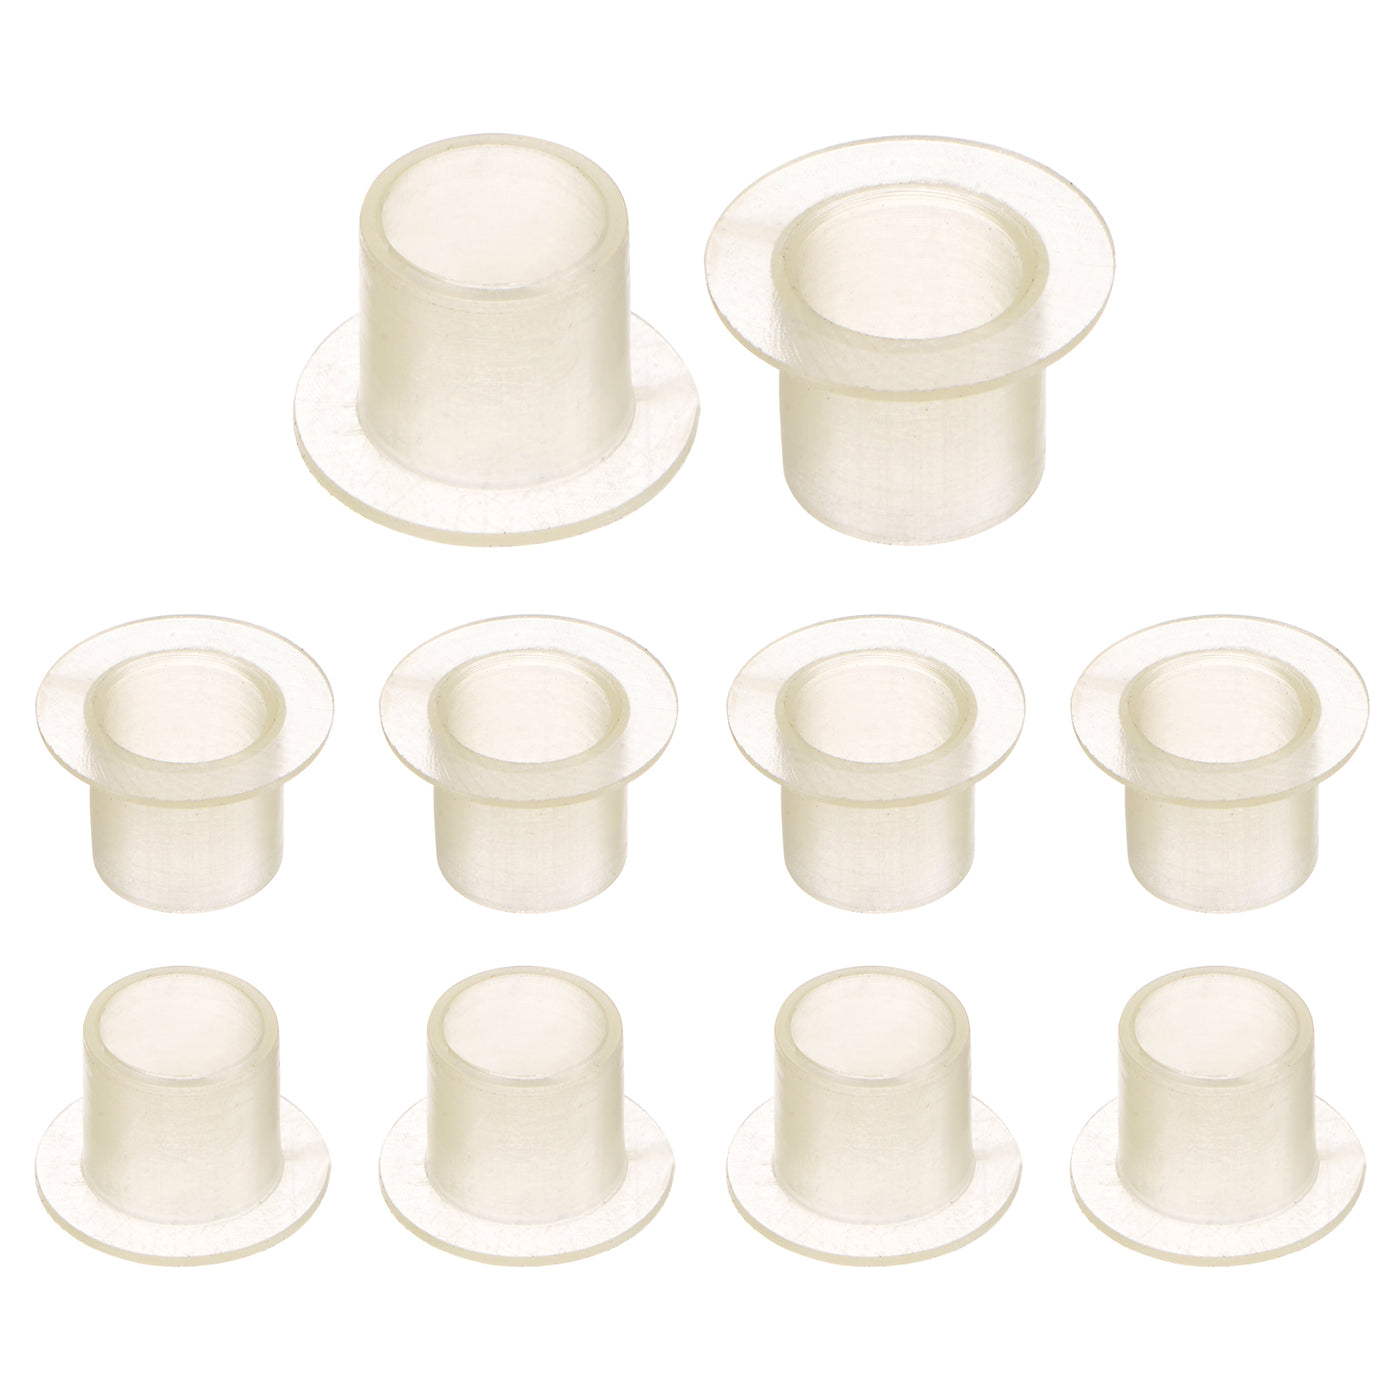 uxcell Uxcell 10pcs Flanged Sleeve Bearings 8.1mm ID 10mm OD 9.6mm Length Nylon Bushing, Beige